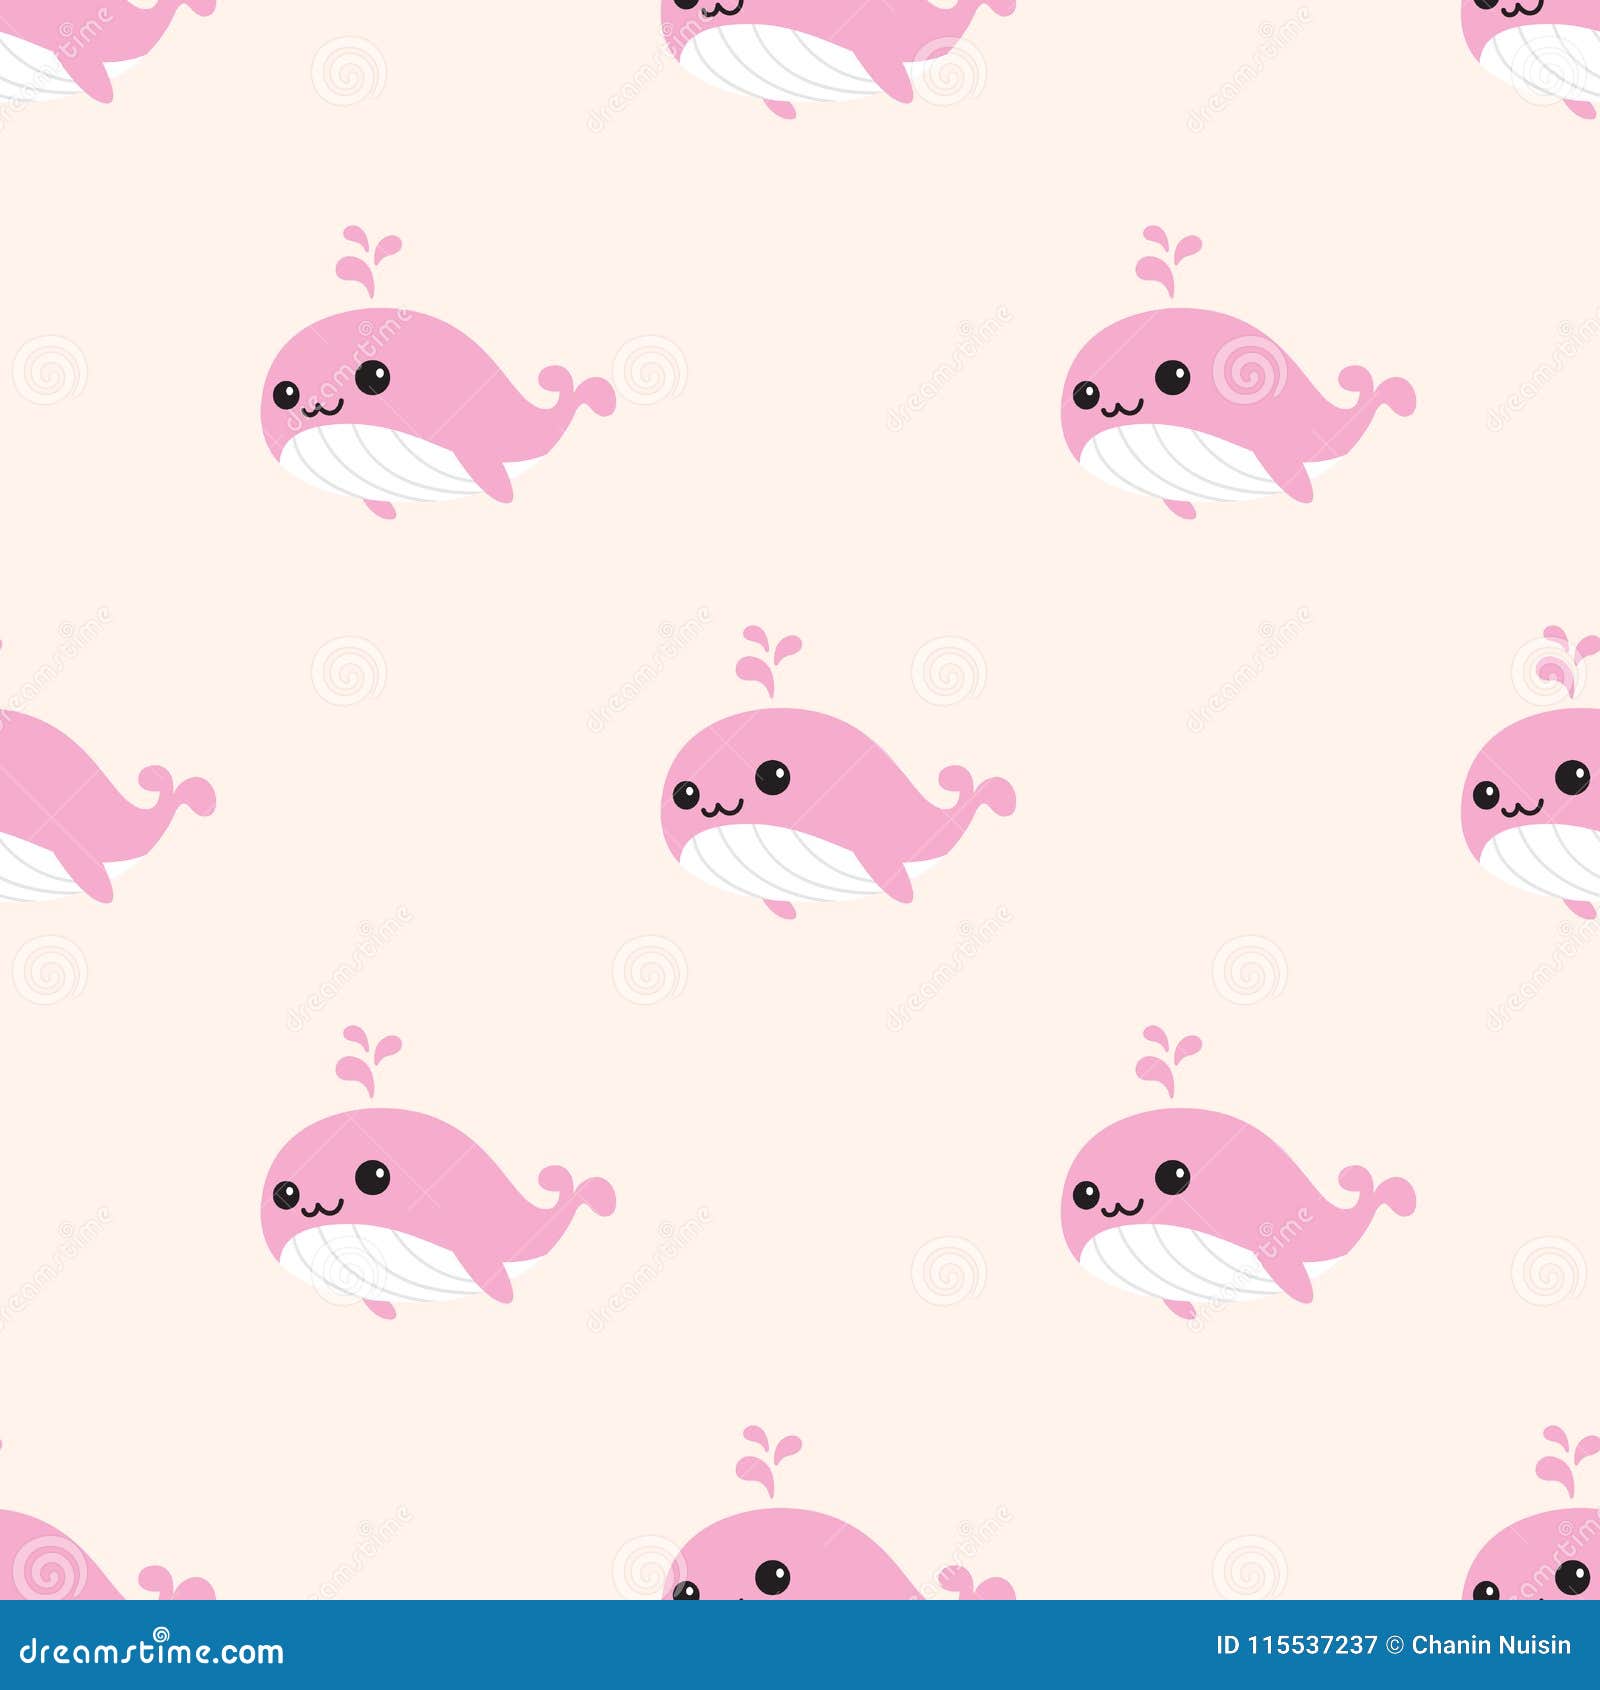 Cute Whales Seamless Pattern Vector Dolphin Shark Ocean Wallpaper  Background Cartoon Pink Stock Illustration - Illustration of vector,  graphic: 115537237